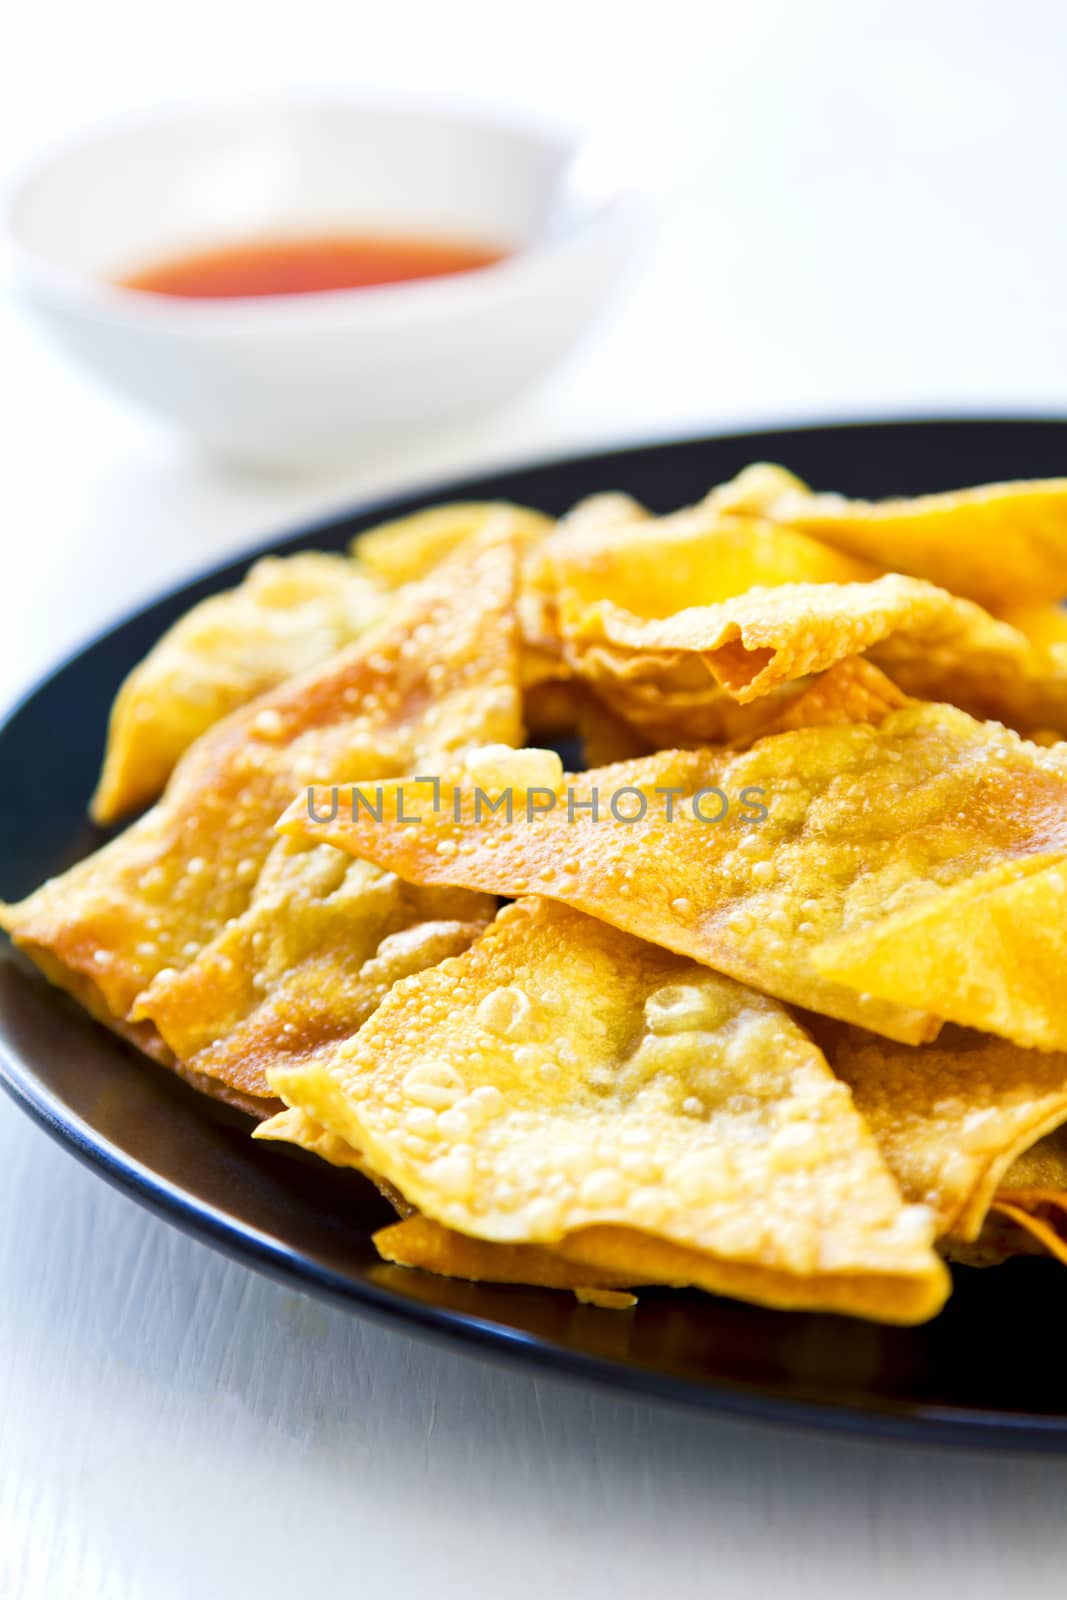 Deep fried Wonton pastry with Thai sweet chili sauce